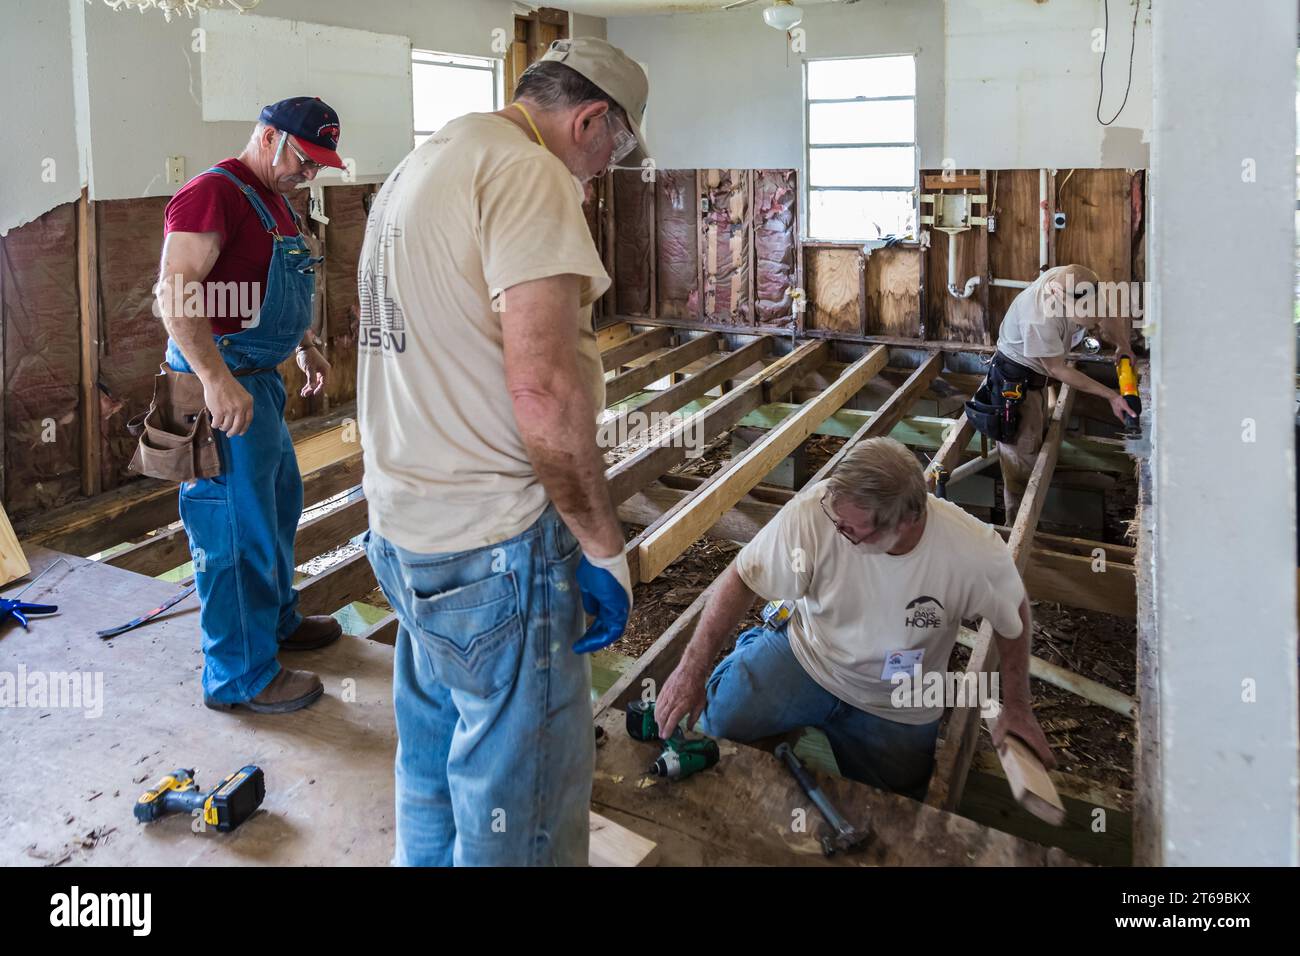 Members of 8 Days of Hope faith based charity volunteer team replacing the floor of a home that was flooded in Houston, Texas Stock Photo